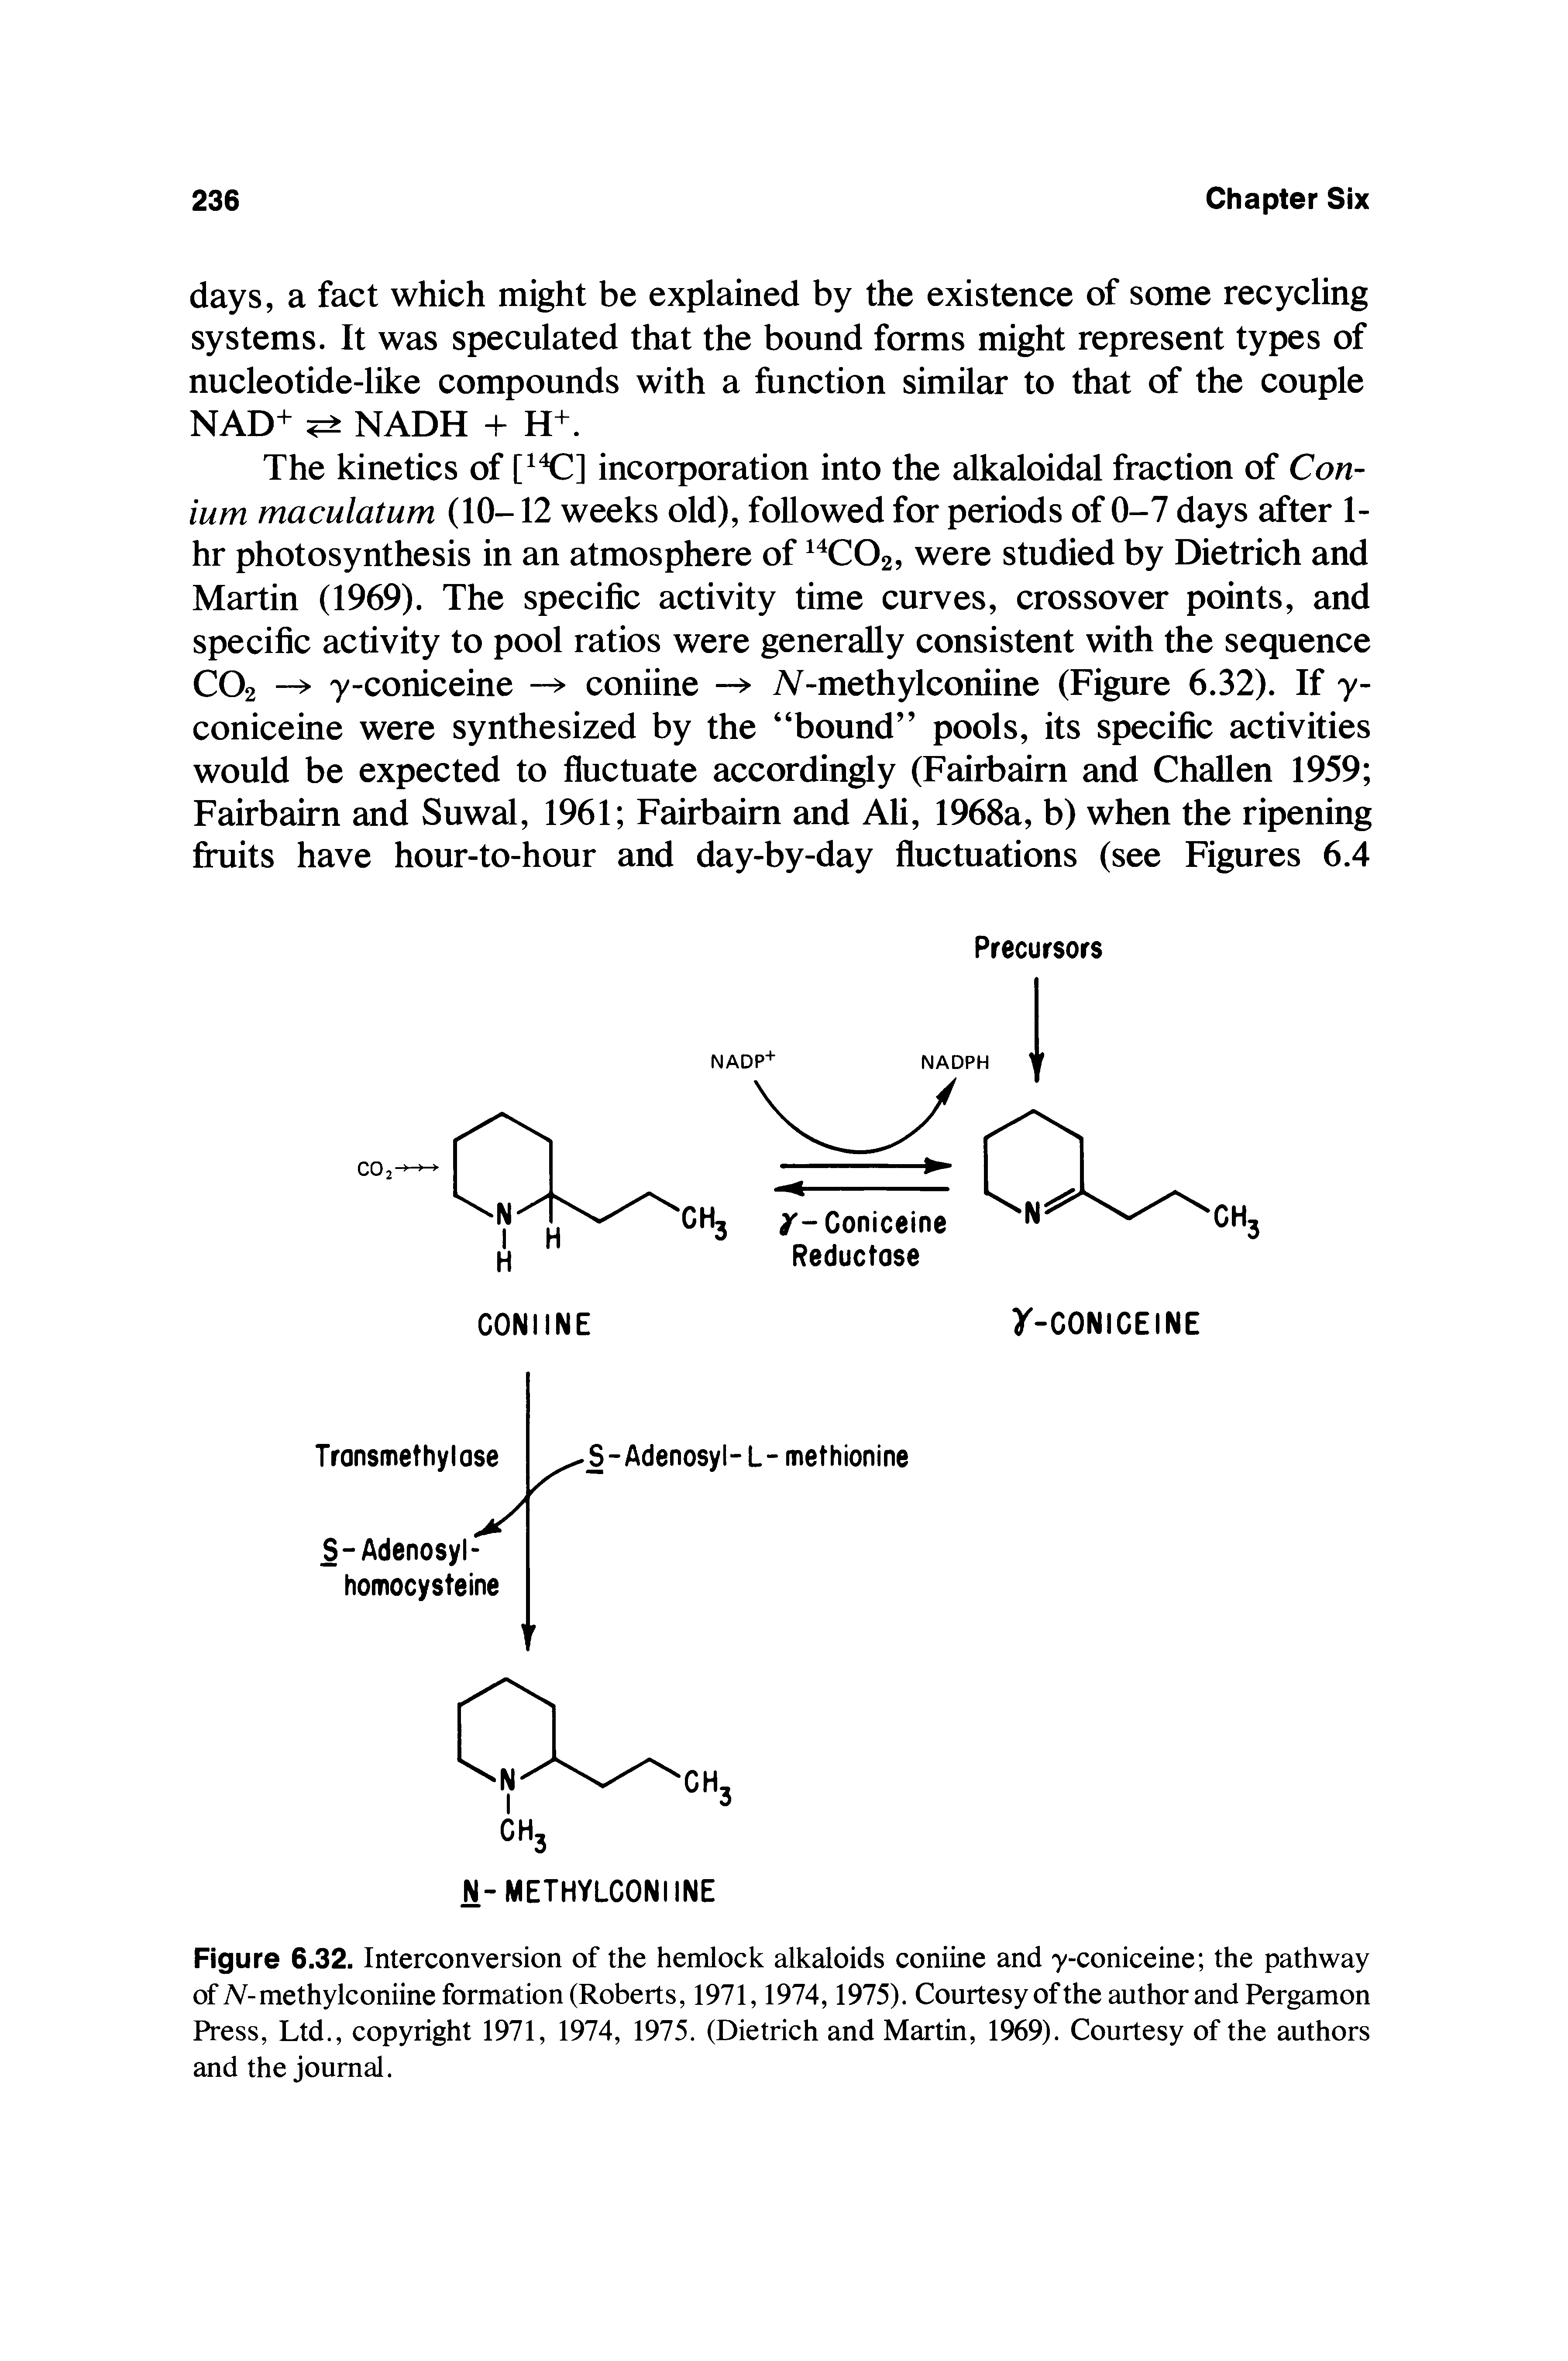 Figure 6.32. Interconversion of the hemlock alkaloids coniine and y-coniceine the pathway of N-methylconiine formation (Roberts, 1971,1974,1975). Courtesy of the author and Pergamon Press, Ltd., copyright 1971, 1974, 1975. (Dietrich and Martin, 1969). Courtesy of the authors and the journal.